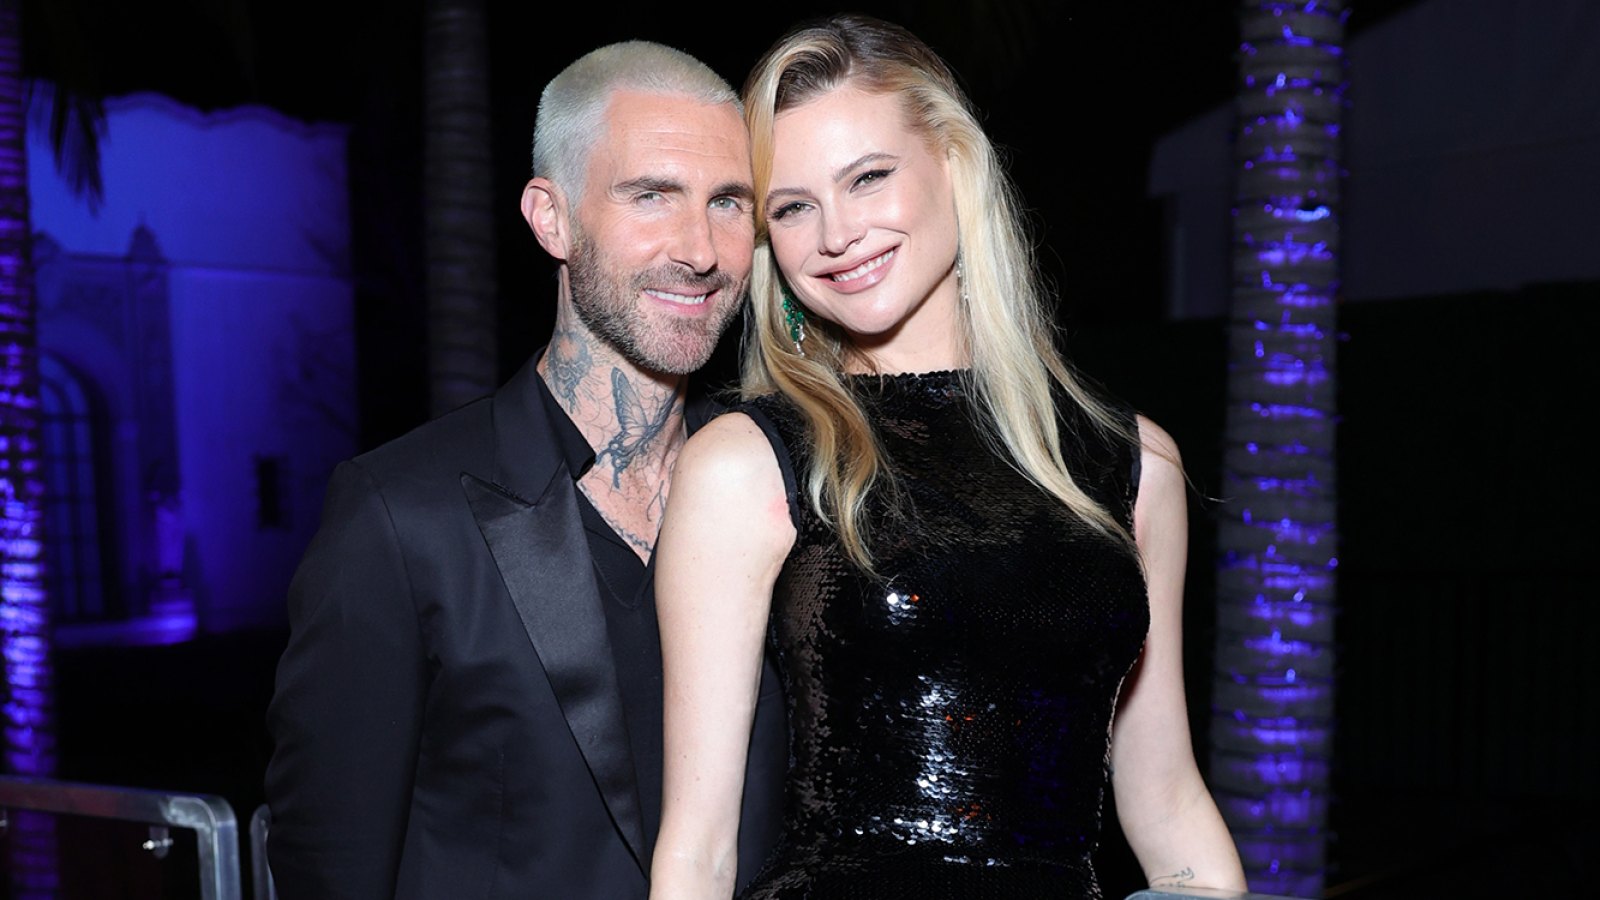 Adam Levine wears a black suit with Behati Prinsloo wearing a black sequin dress as they smile and pose at the Vanity Fair Oscar Party